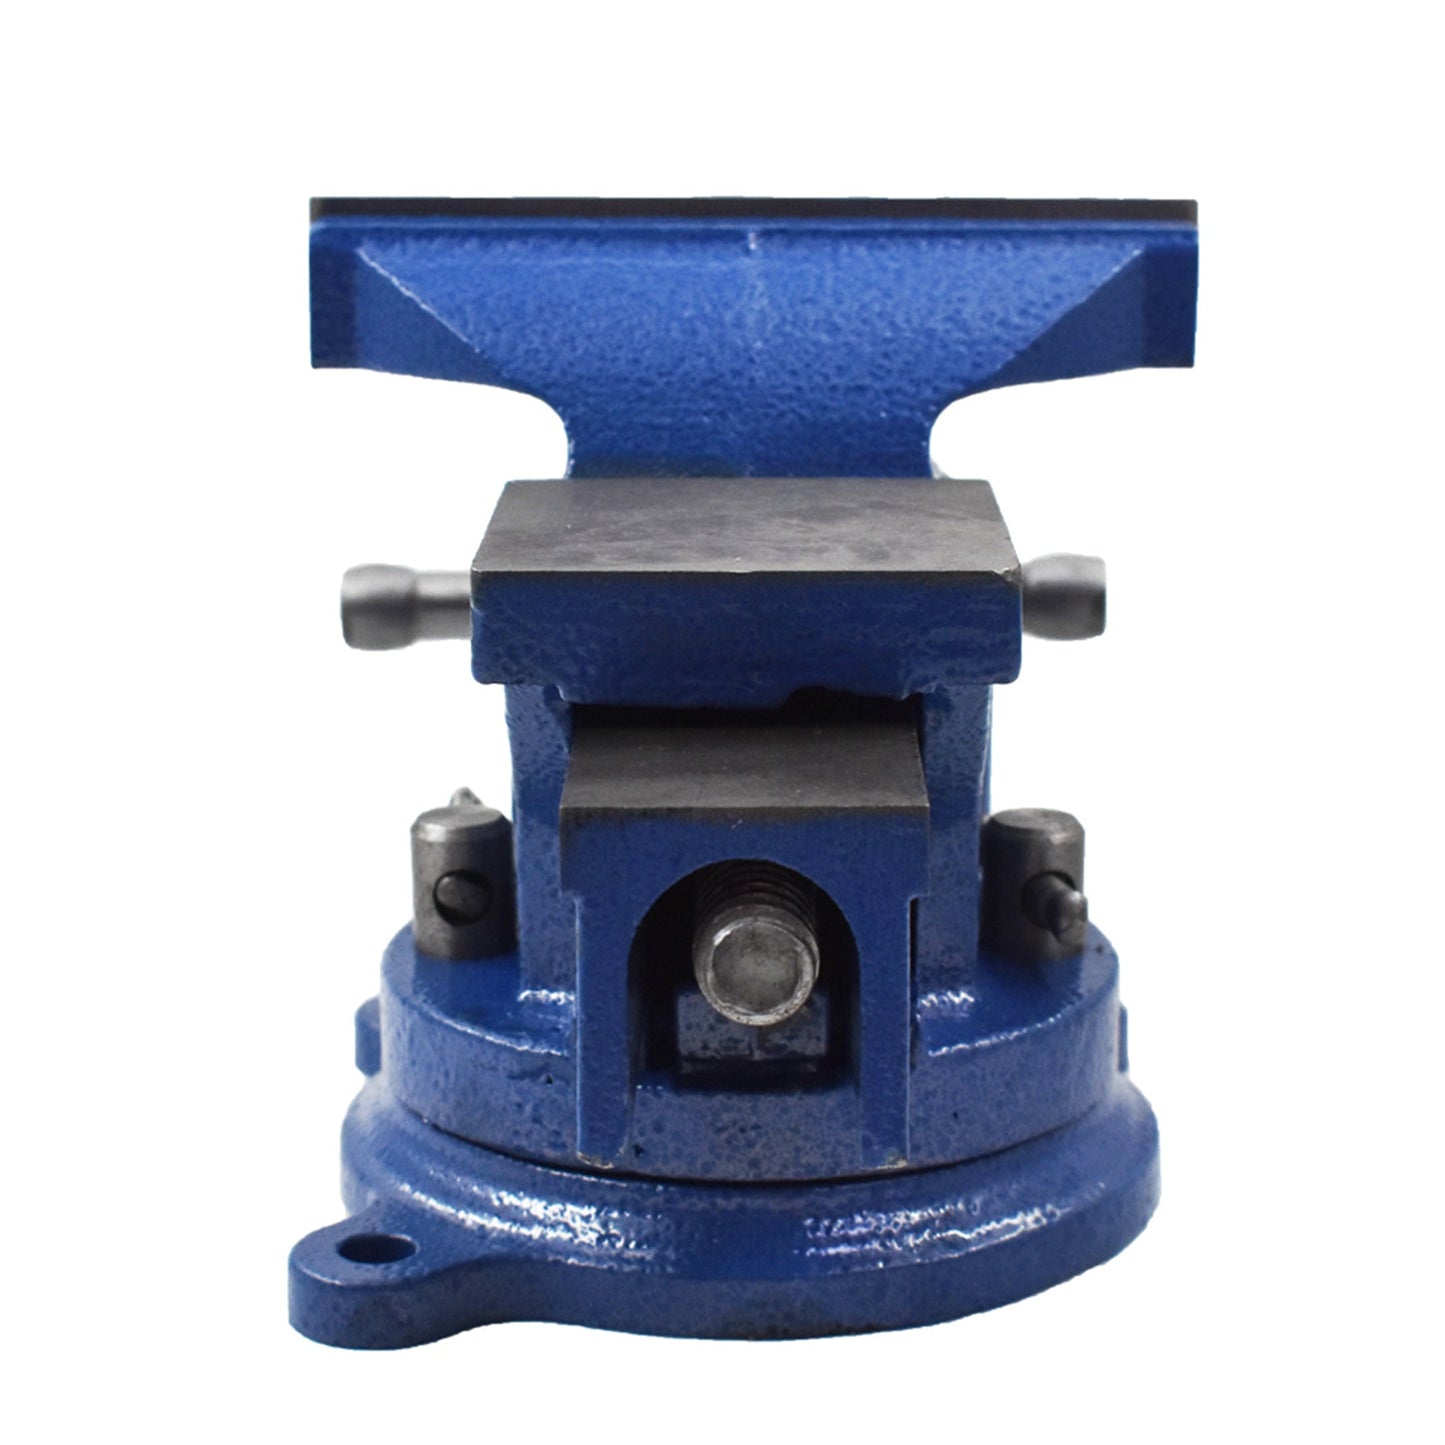 findmall 4" Bench Vise with Anvil 360 Swivel Locking Base Table top Clamp Heavy Duty Vice FINDMALLPARTS